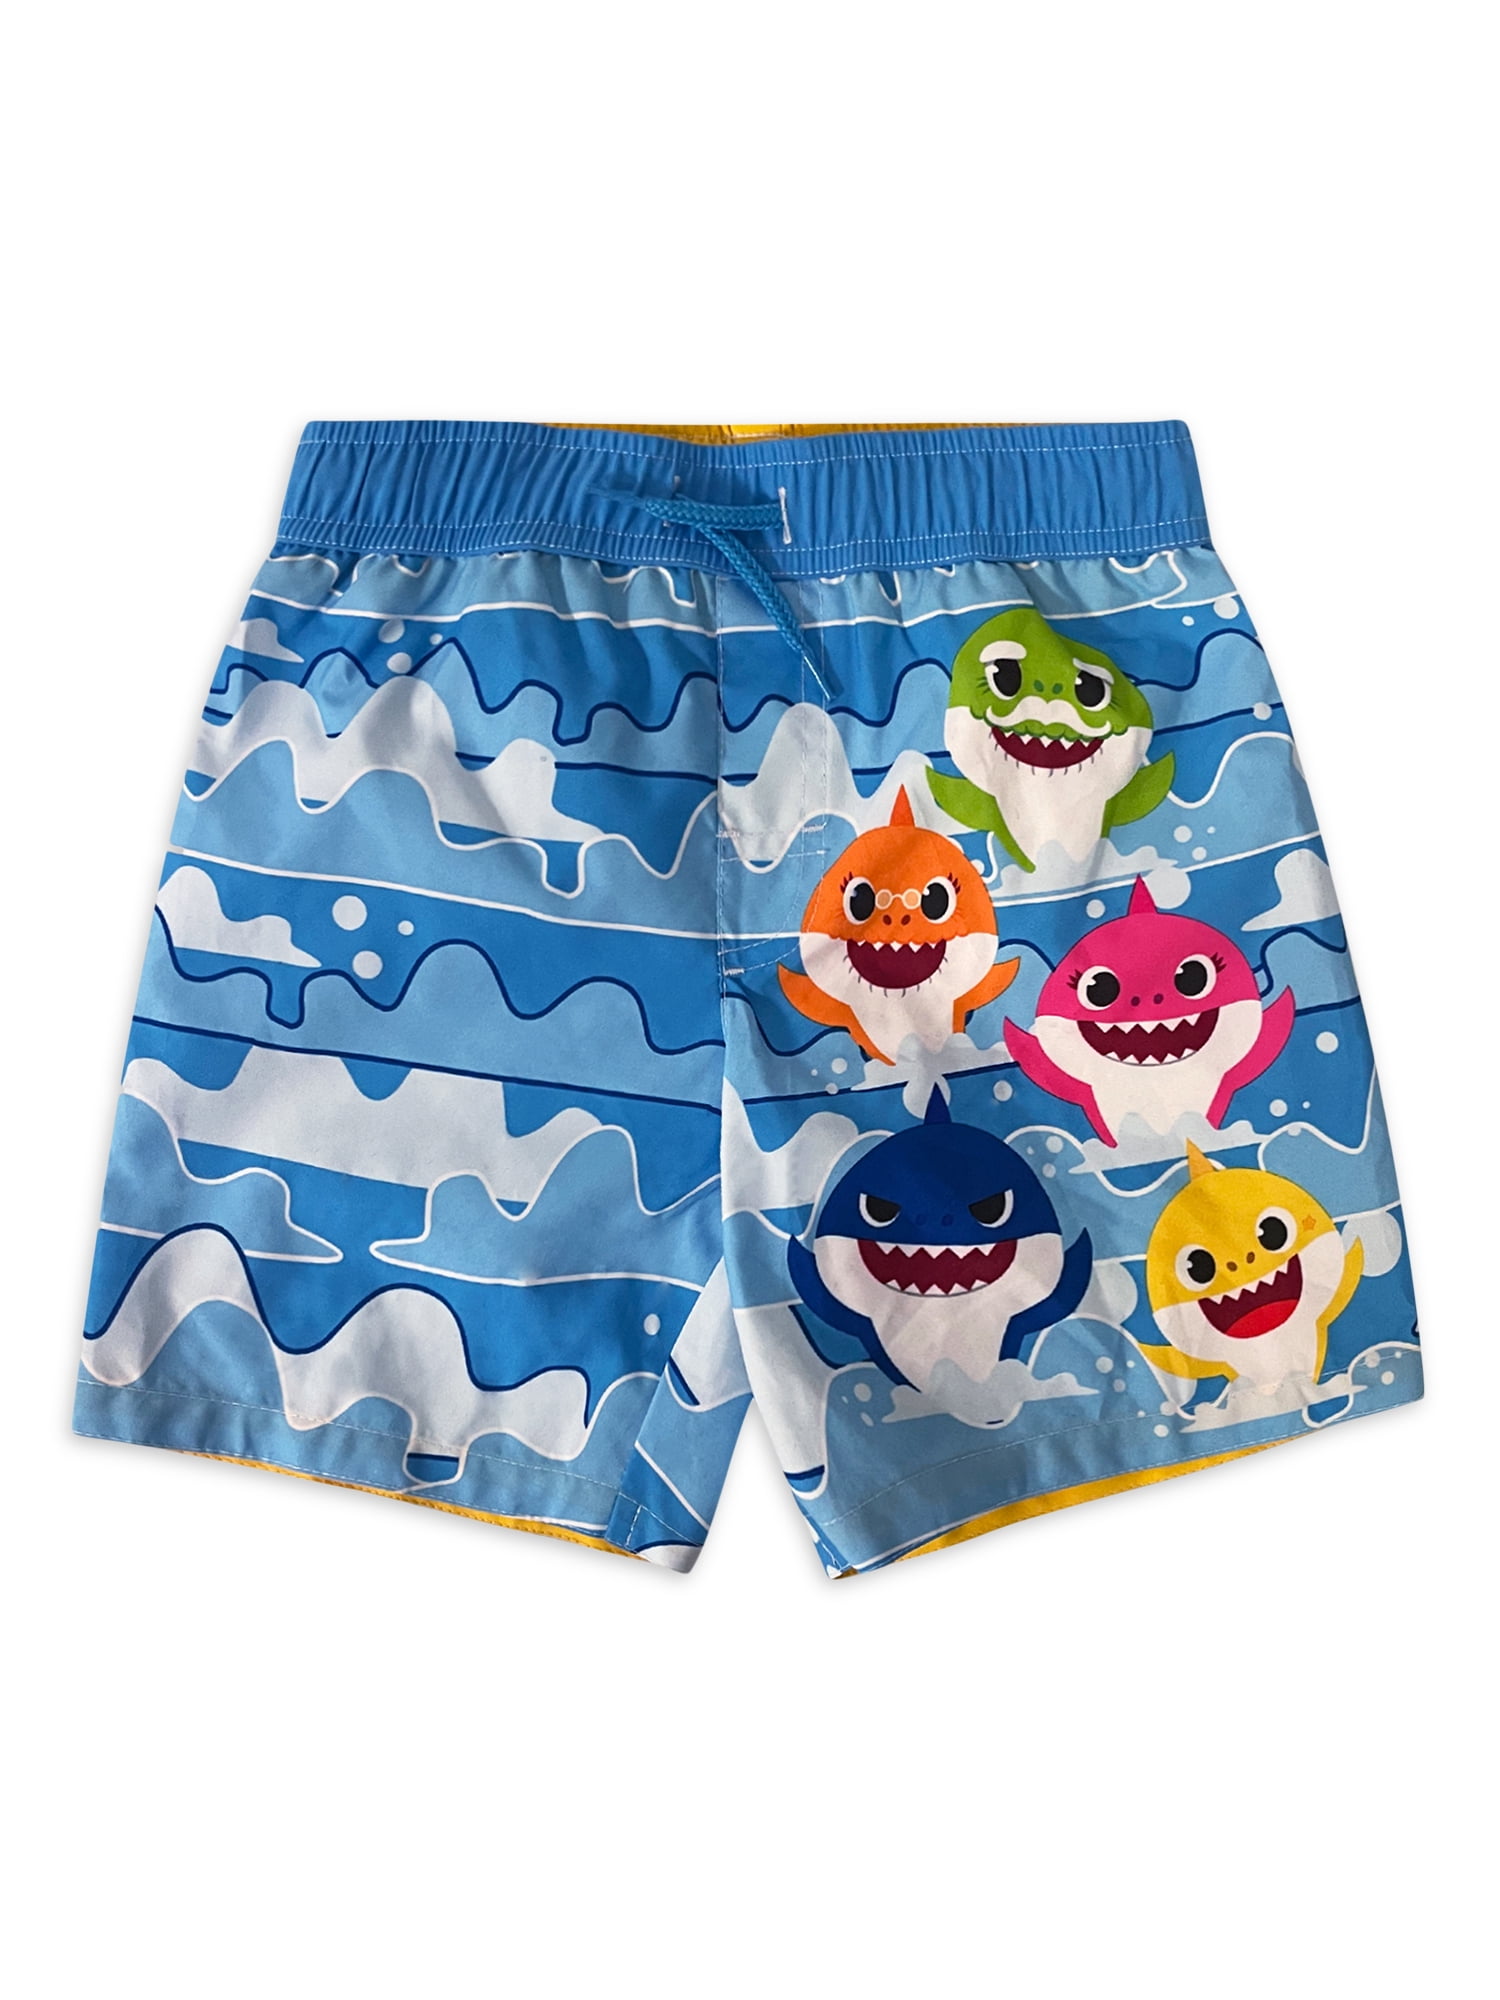 Cargo Bay Boys Swim Shorts with Contrast Side Piping 